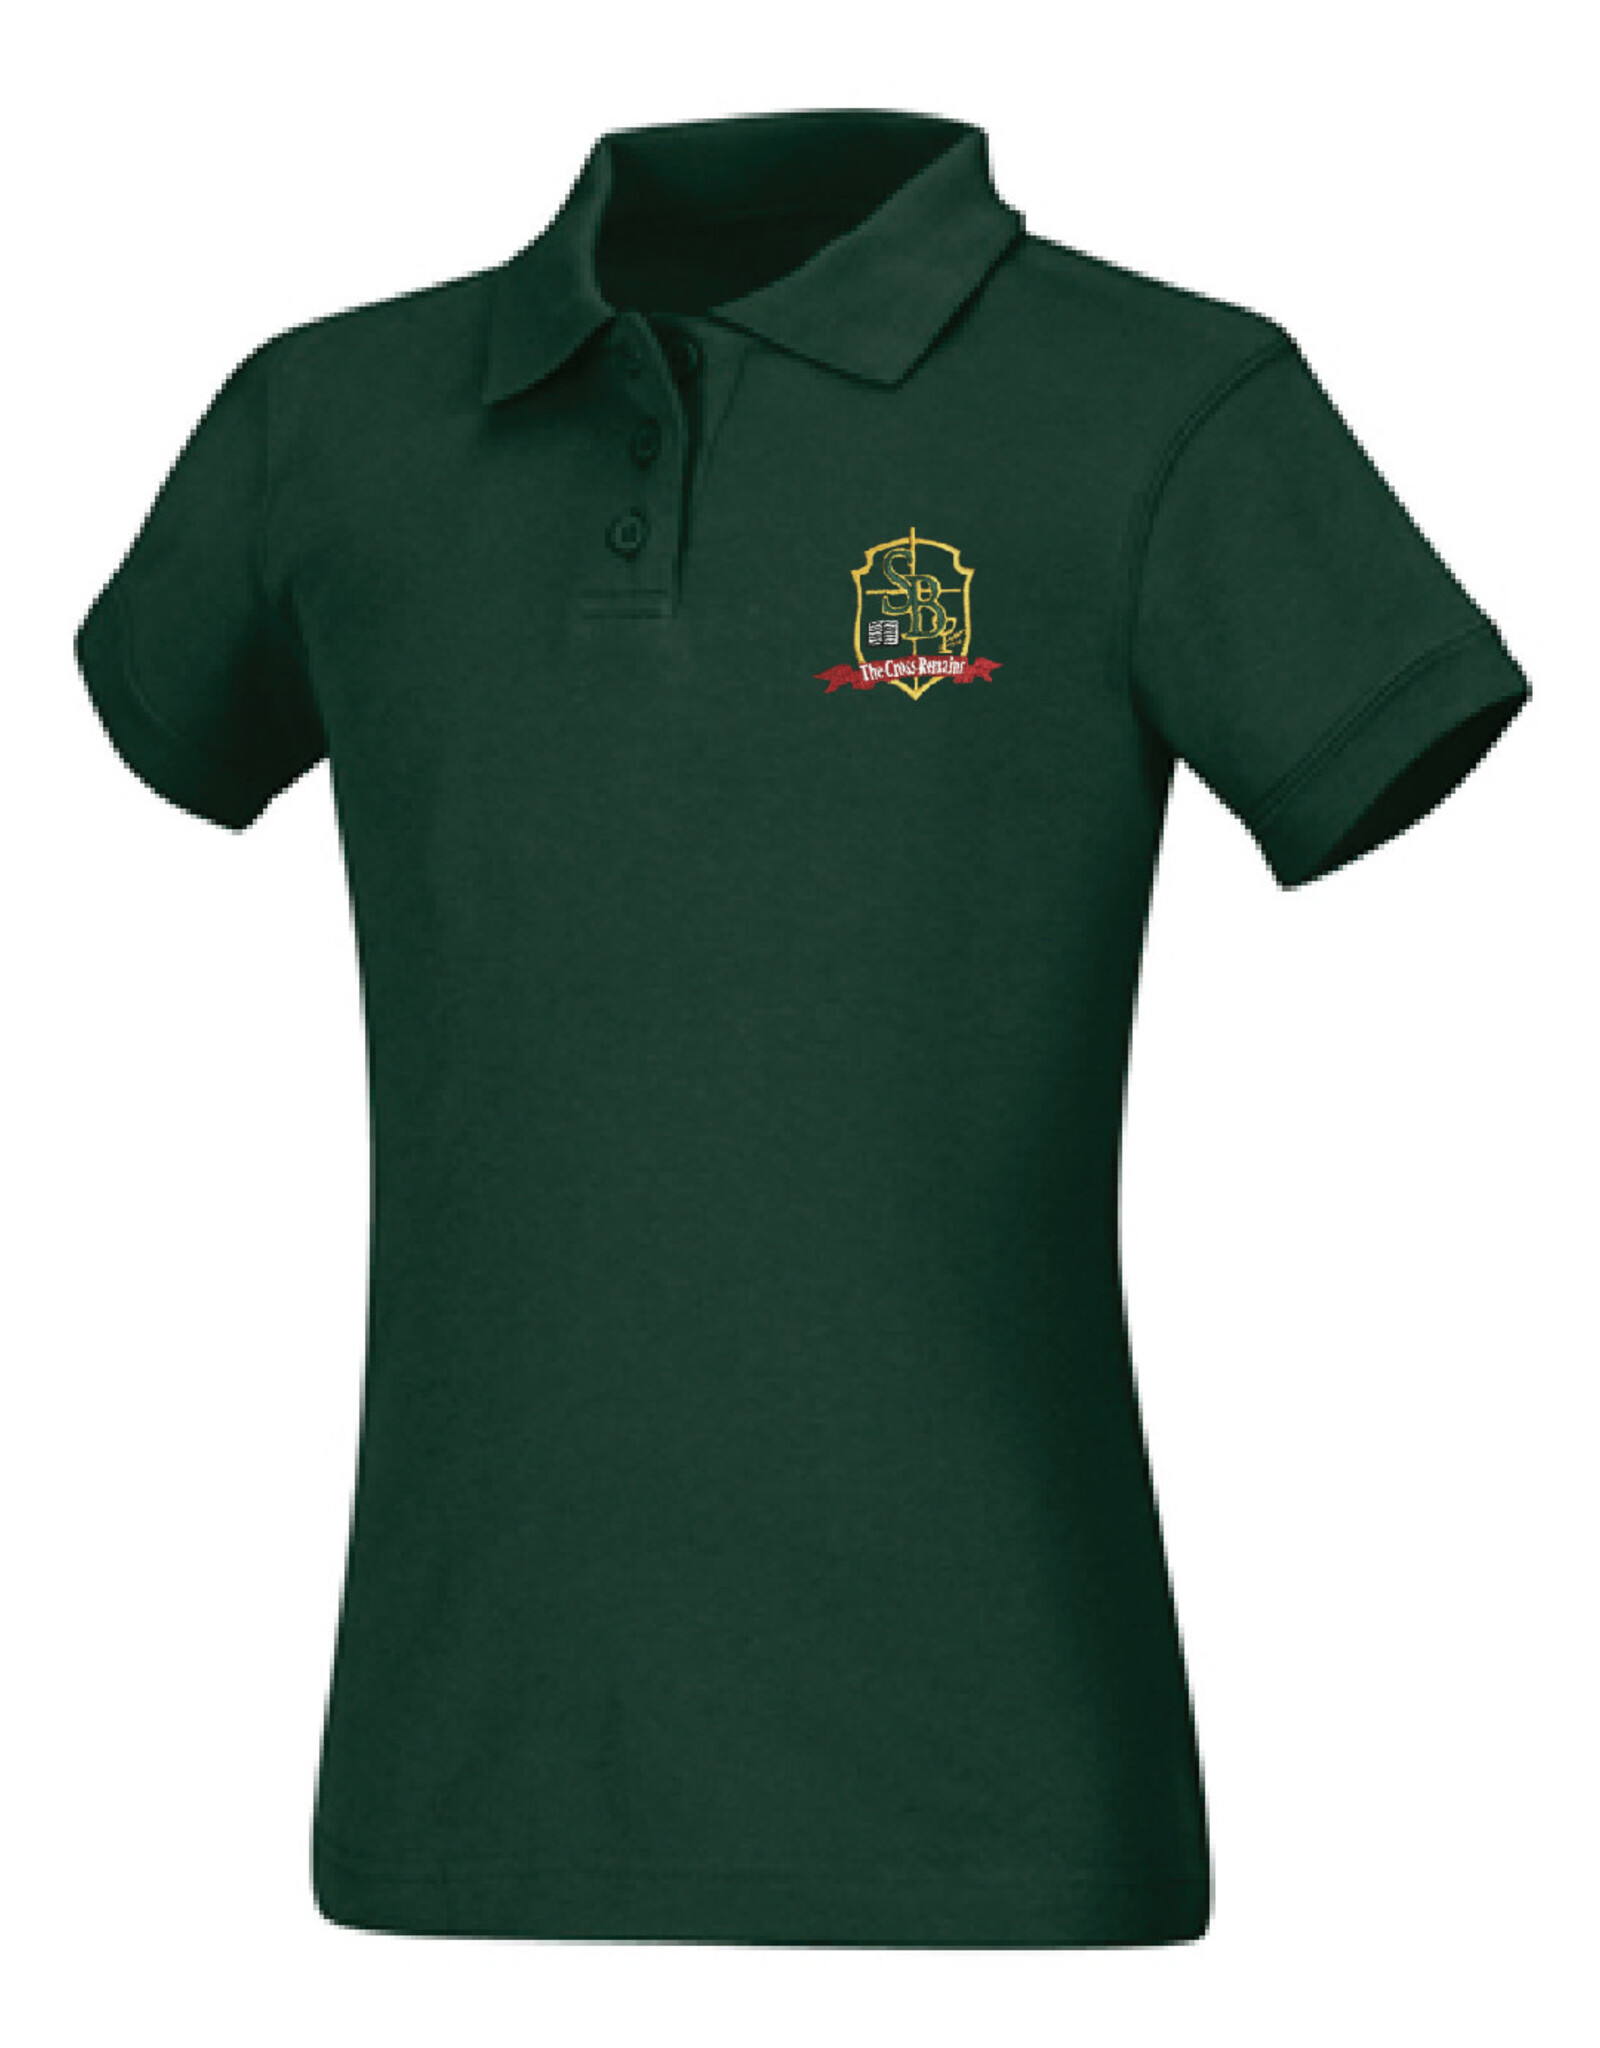 Classroom SB Girls Fitted Polo- YOUTH